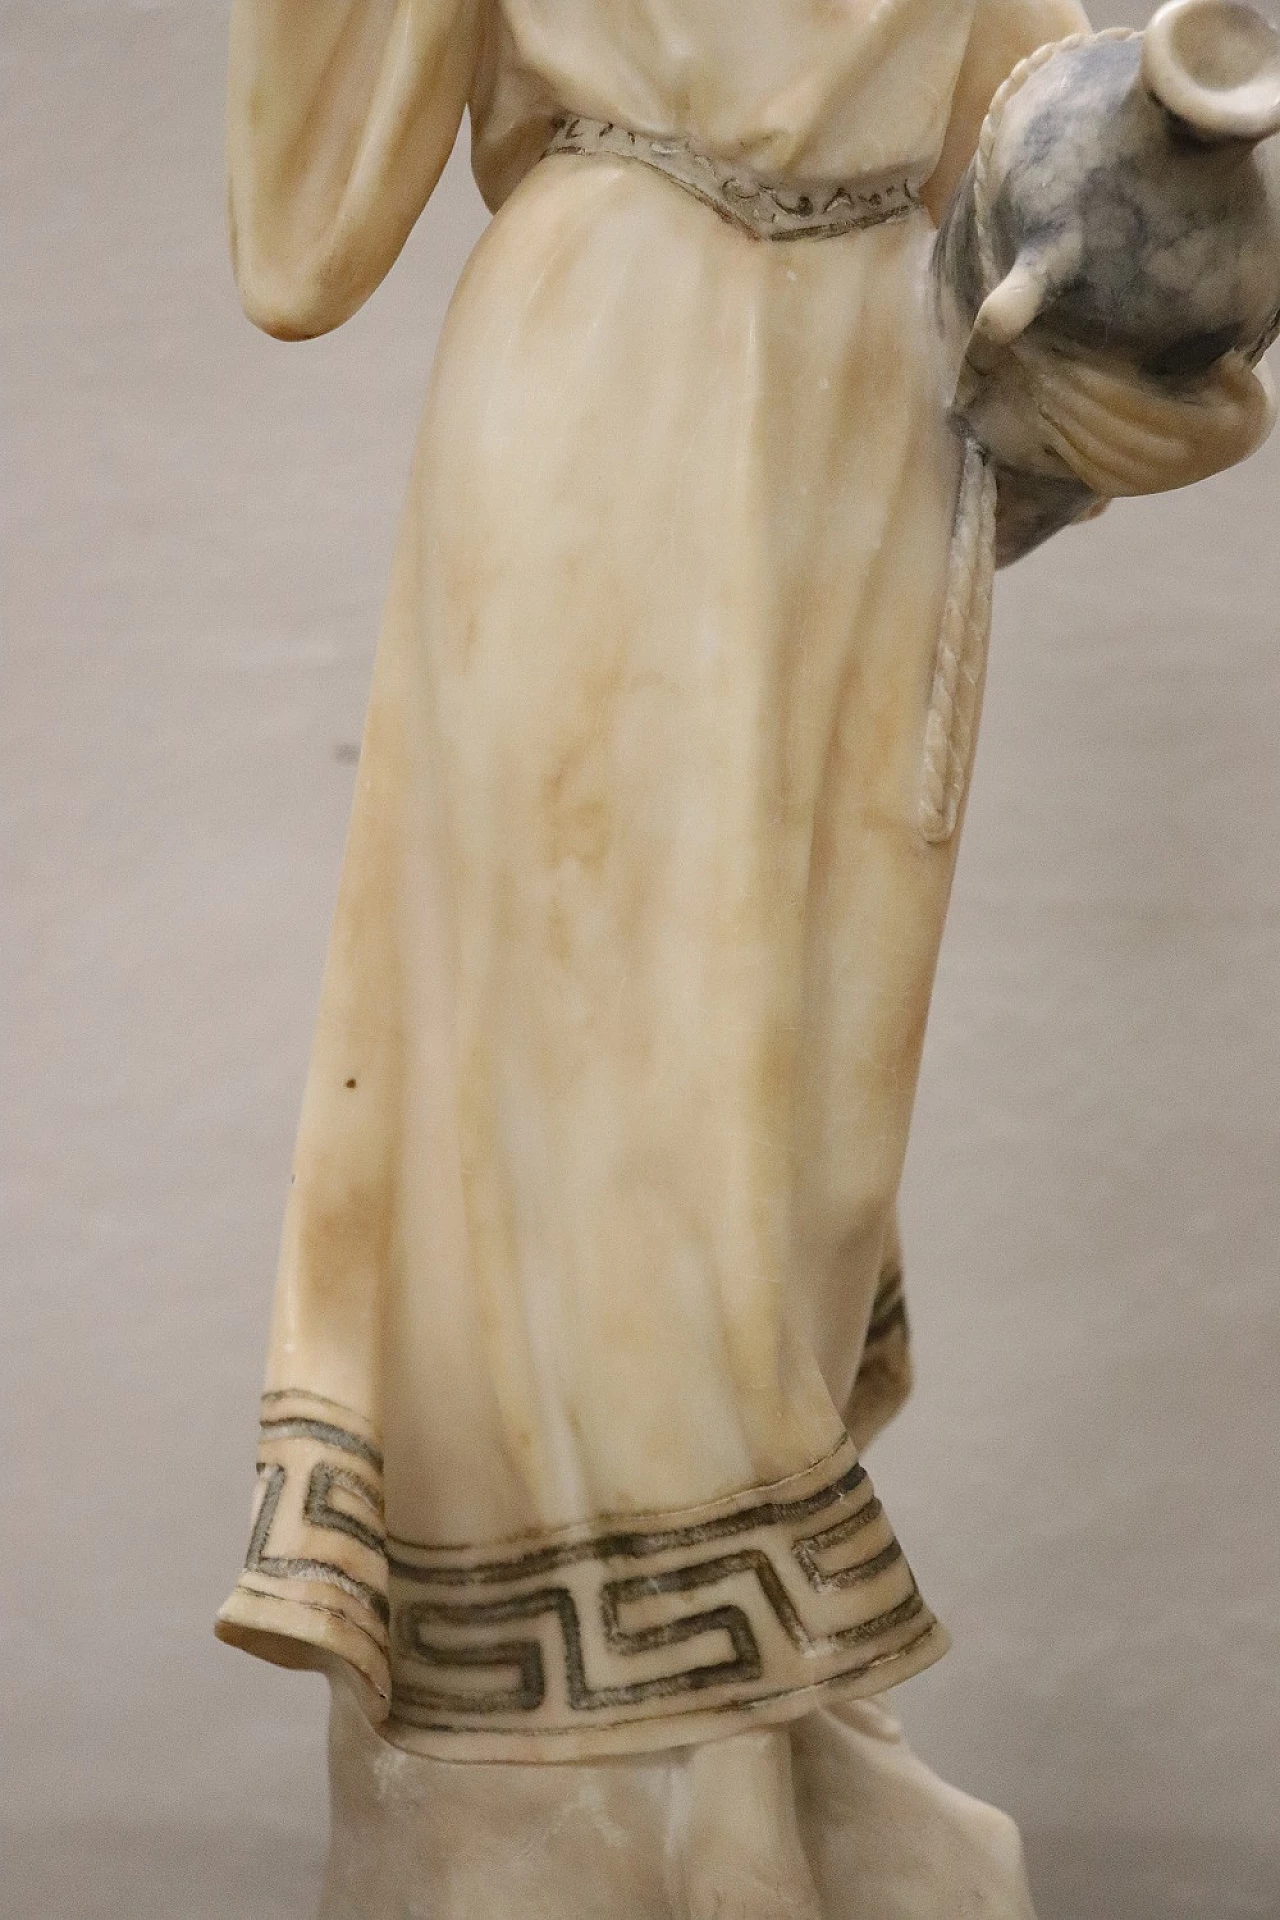 Carrara marble water carrier sculpture, early 20th century 4